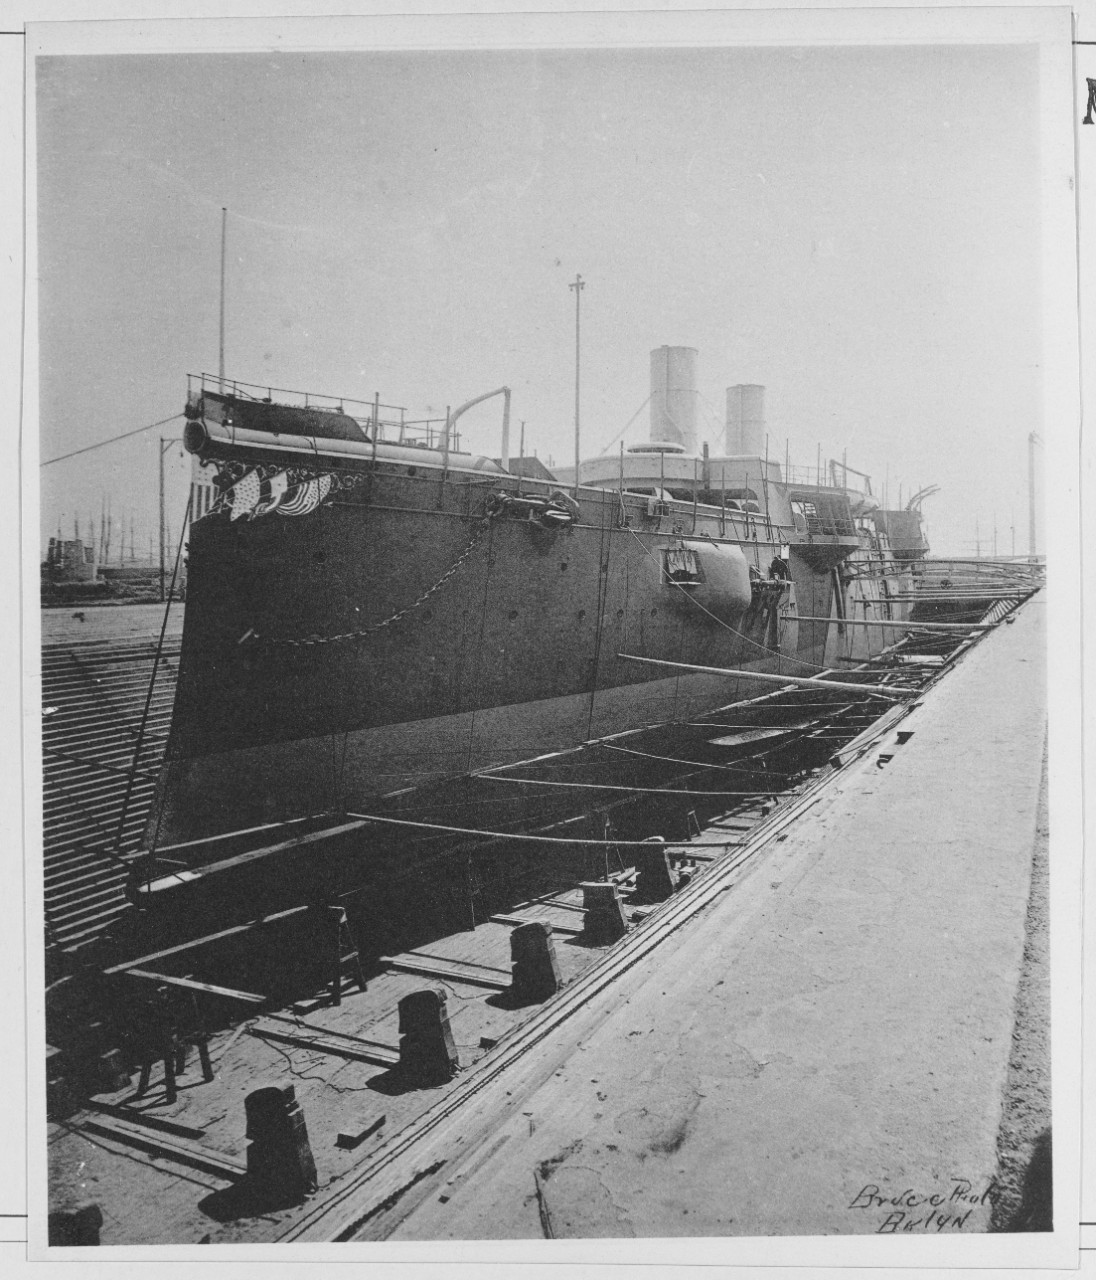 Dock No 2 with USS CHICAGO (CA-14).